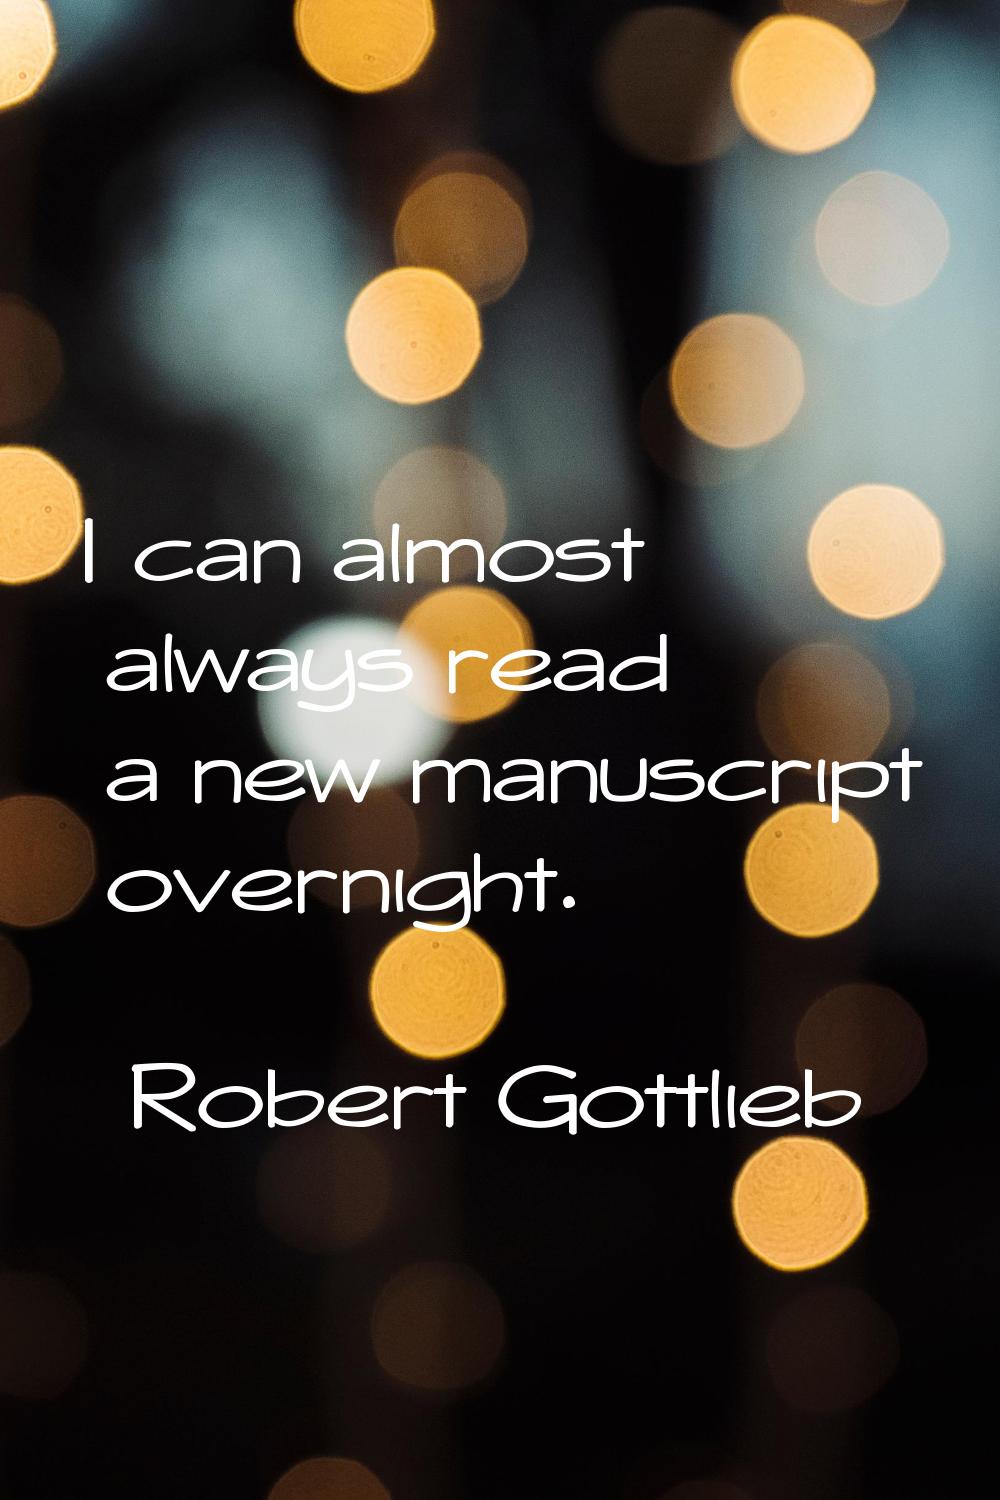 I can almost always read a new manuscript overnight.